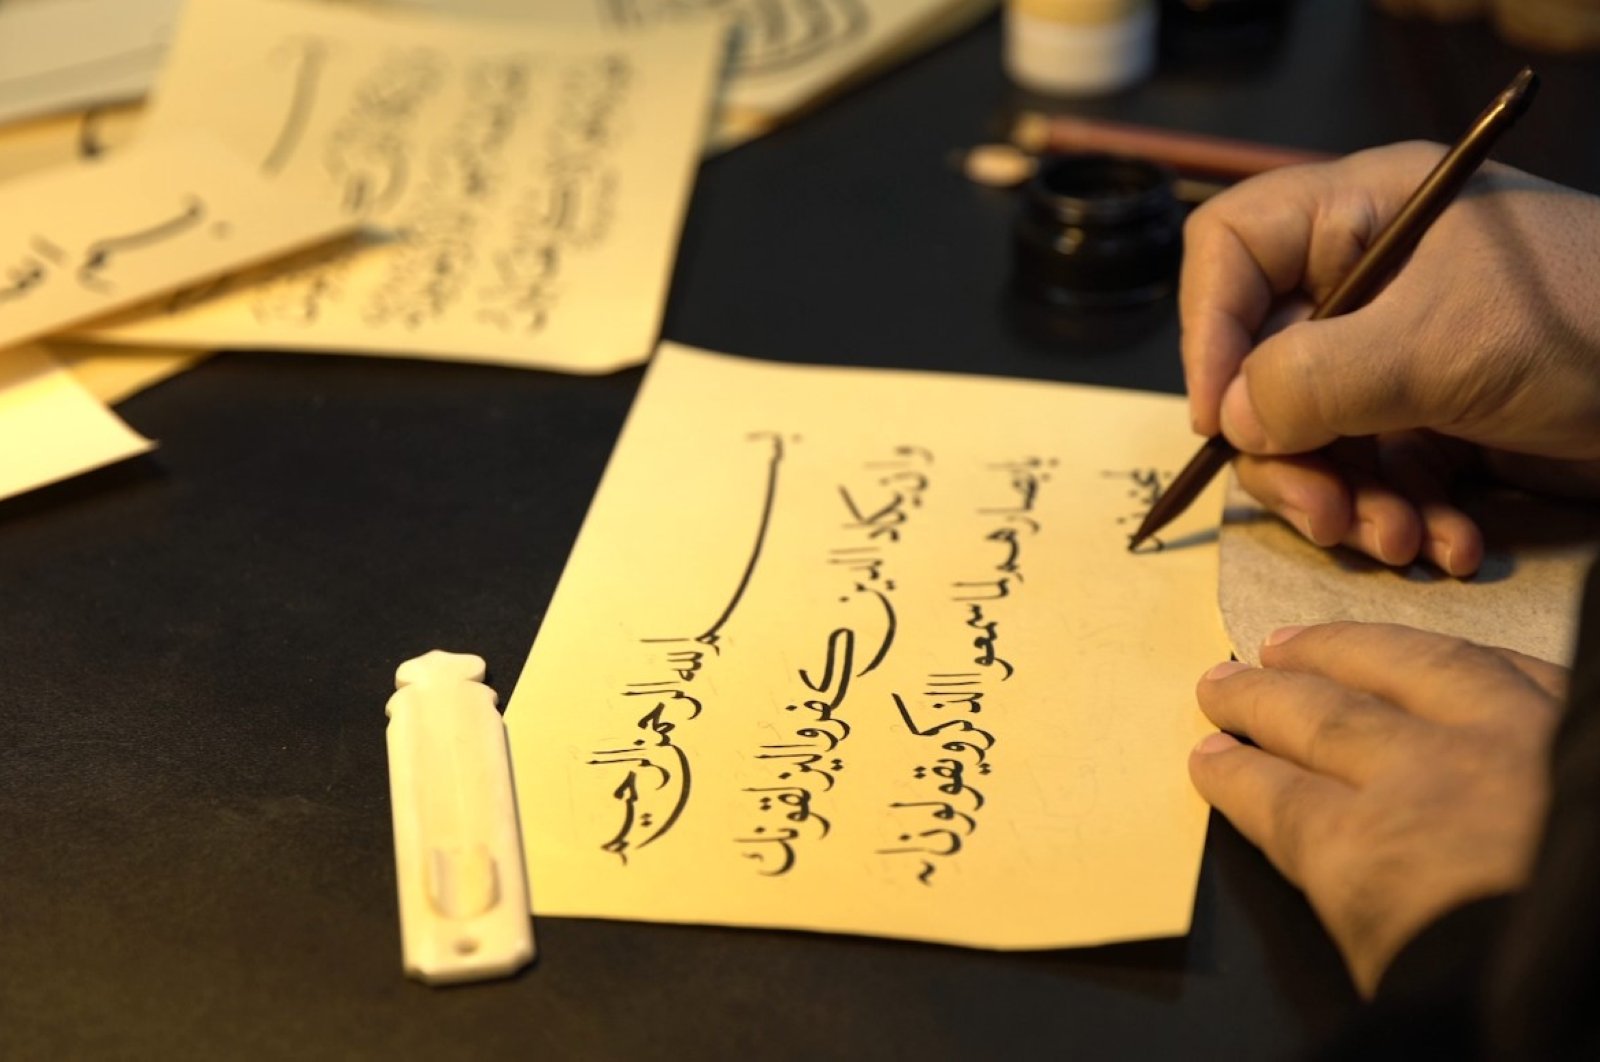 Islamic calligraphy also means attention, moderation, respect, spirituality and love, along with being beautiful writing.